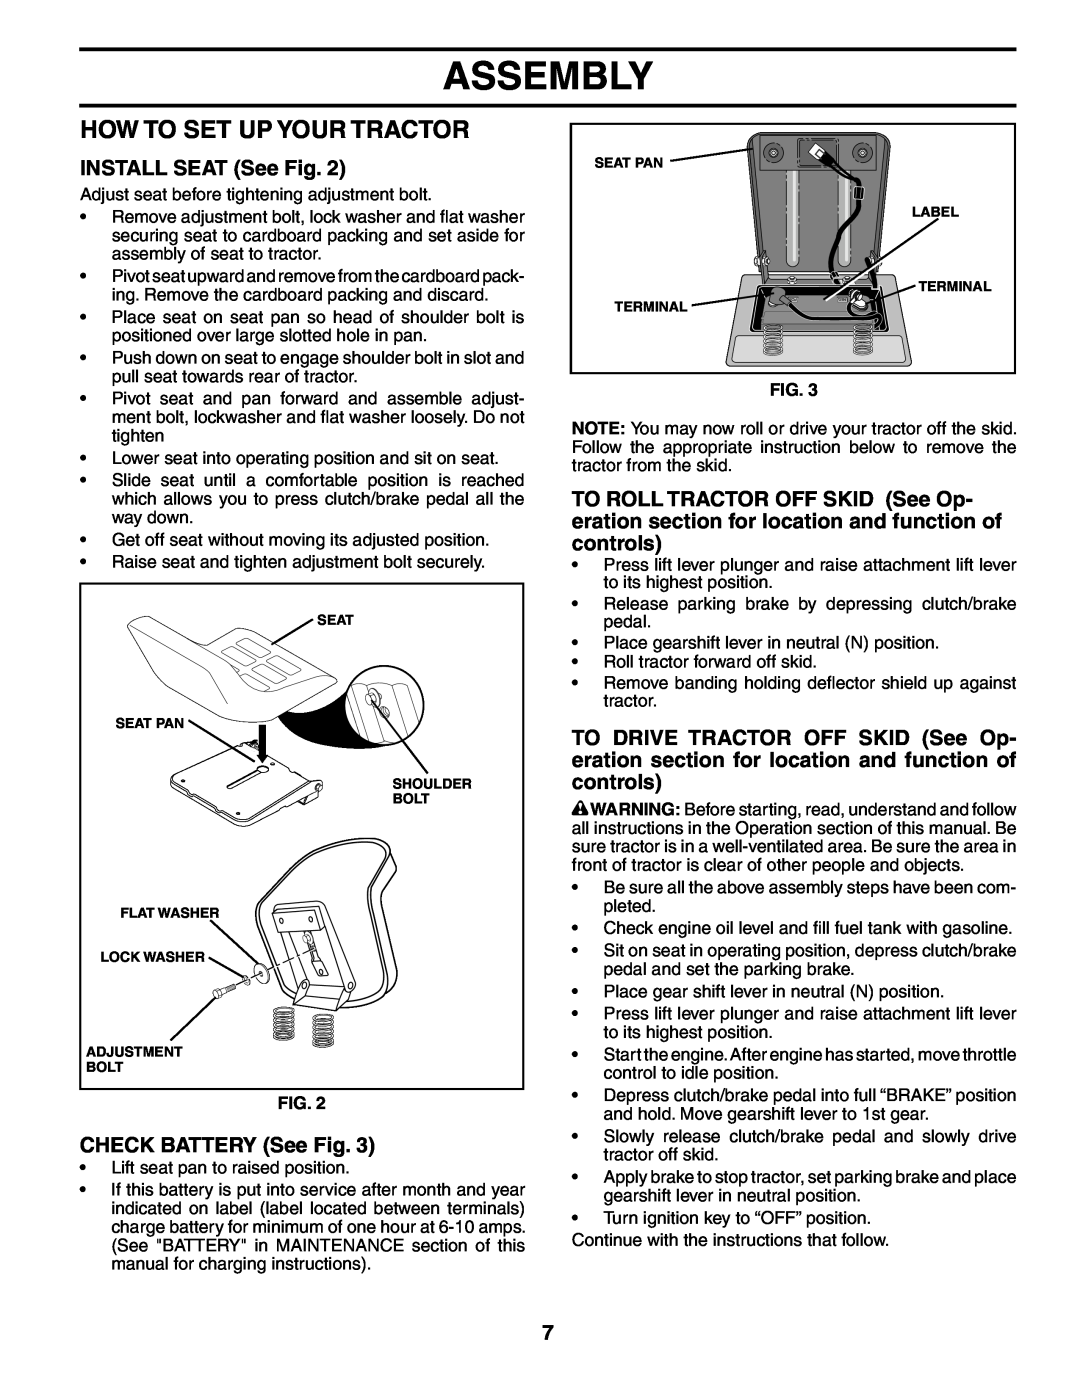 Poulan 184518, 954569554 manual How To Set Up Your Tractor, INSTALL SEAT See Fig, CHECK BATTERY See Fig, Assembly 